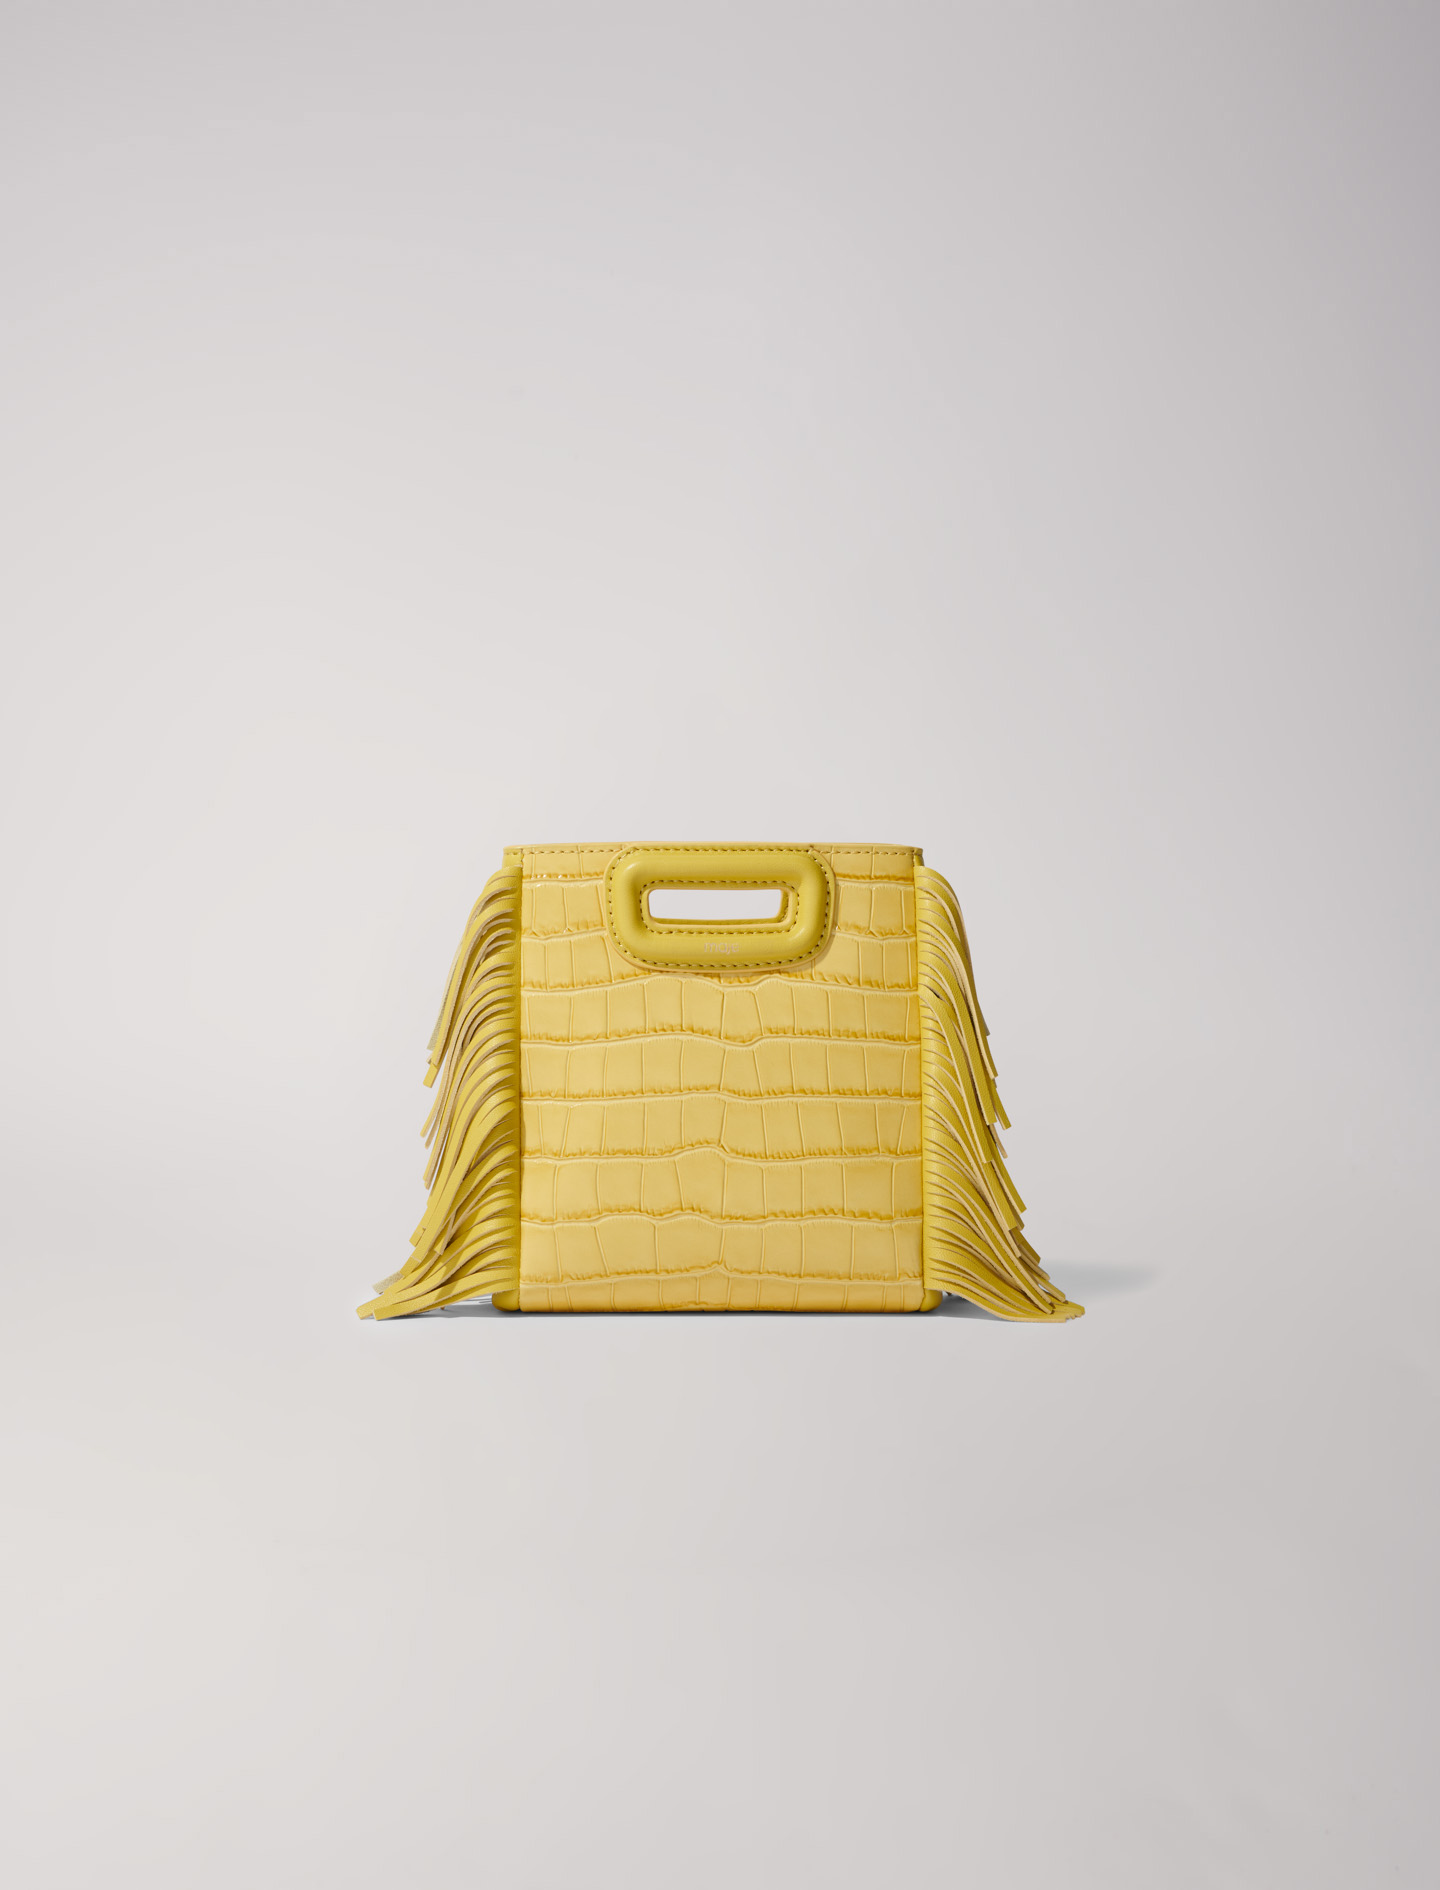 Mixte's polyester Chain: Mini embossed-leather M bag with chain, size Mixte-All Bags-OS (ONE SIZE), in color Yellow / Yellow